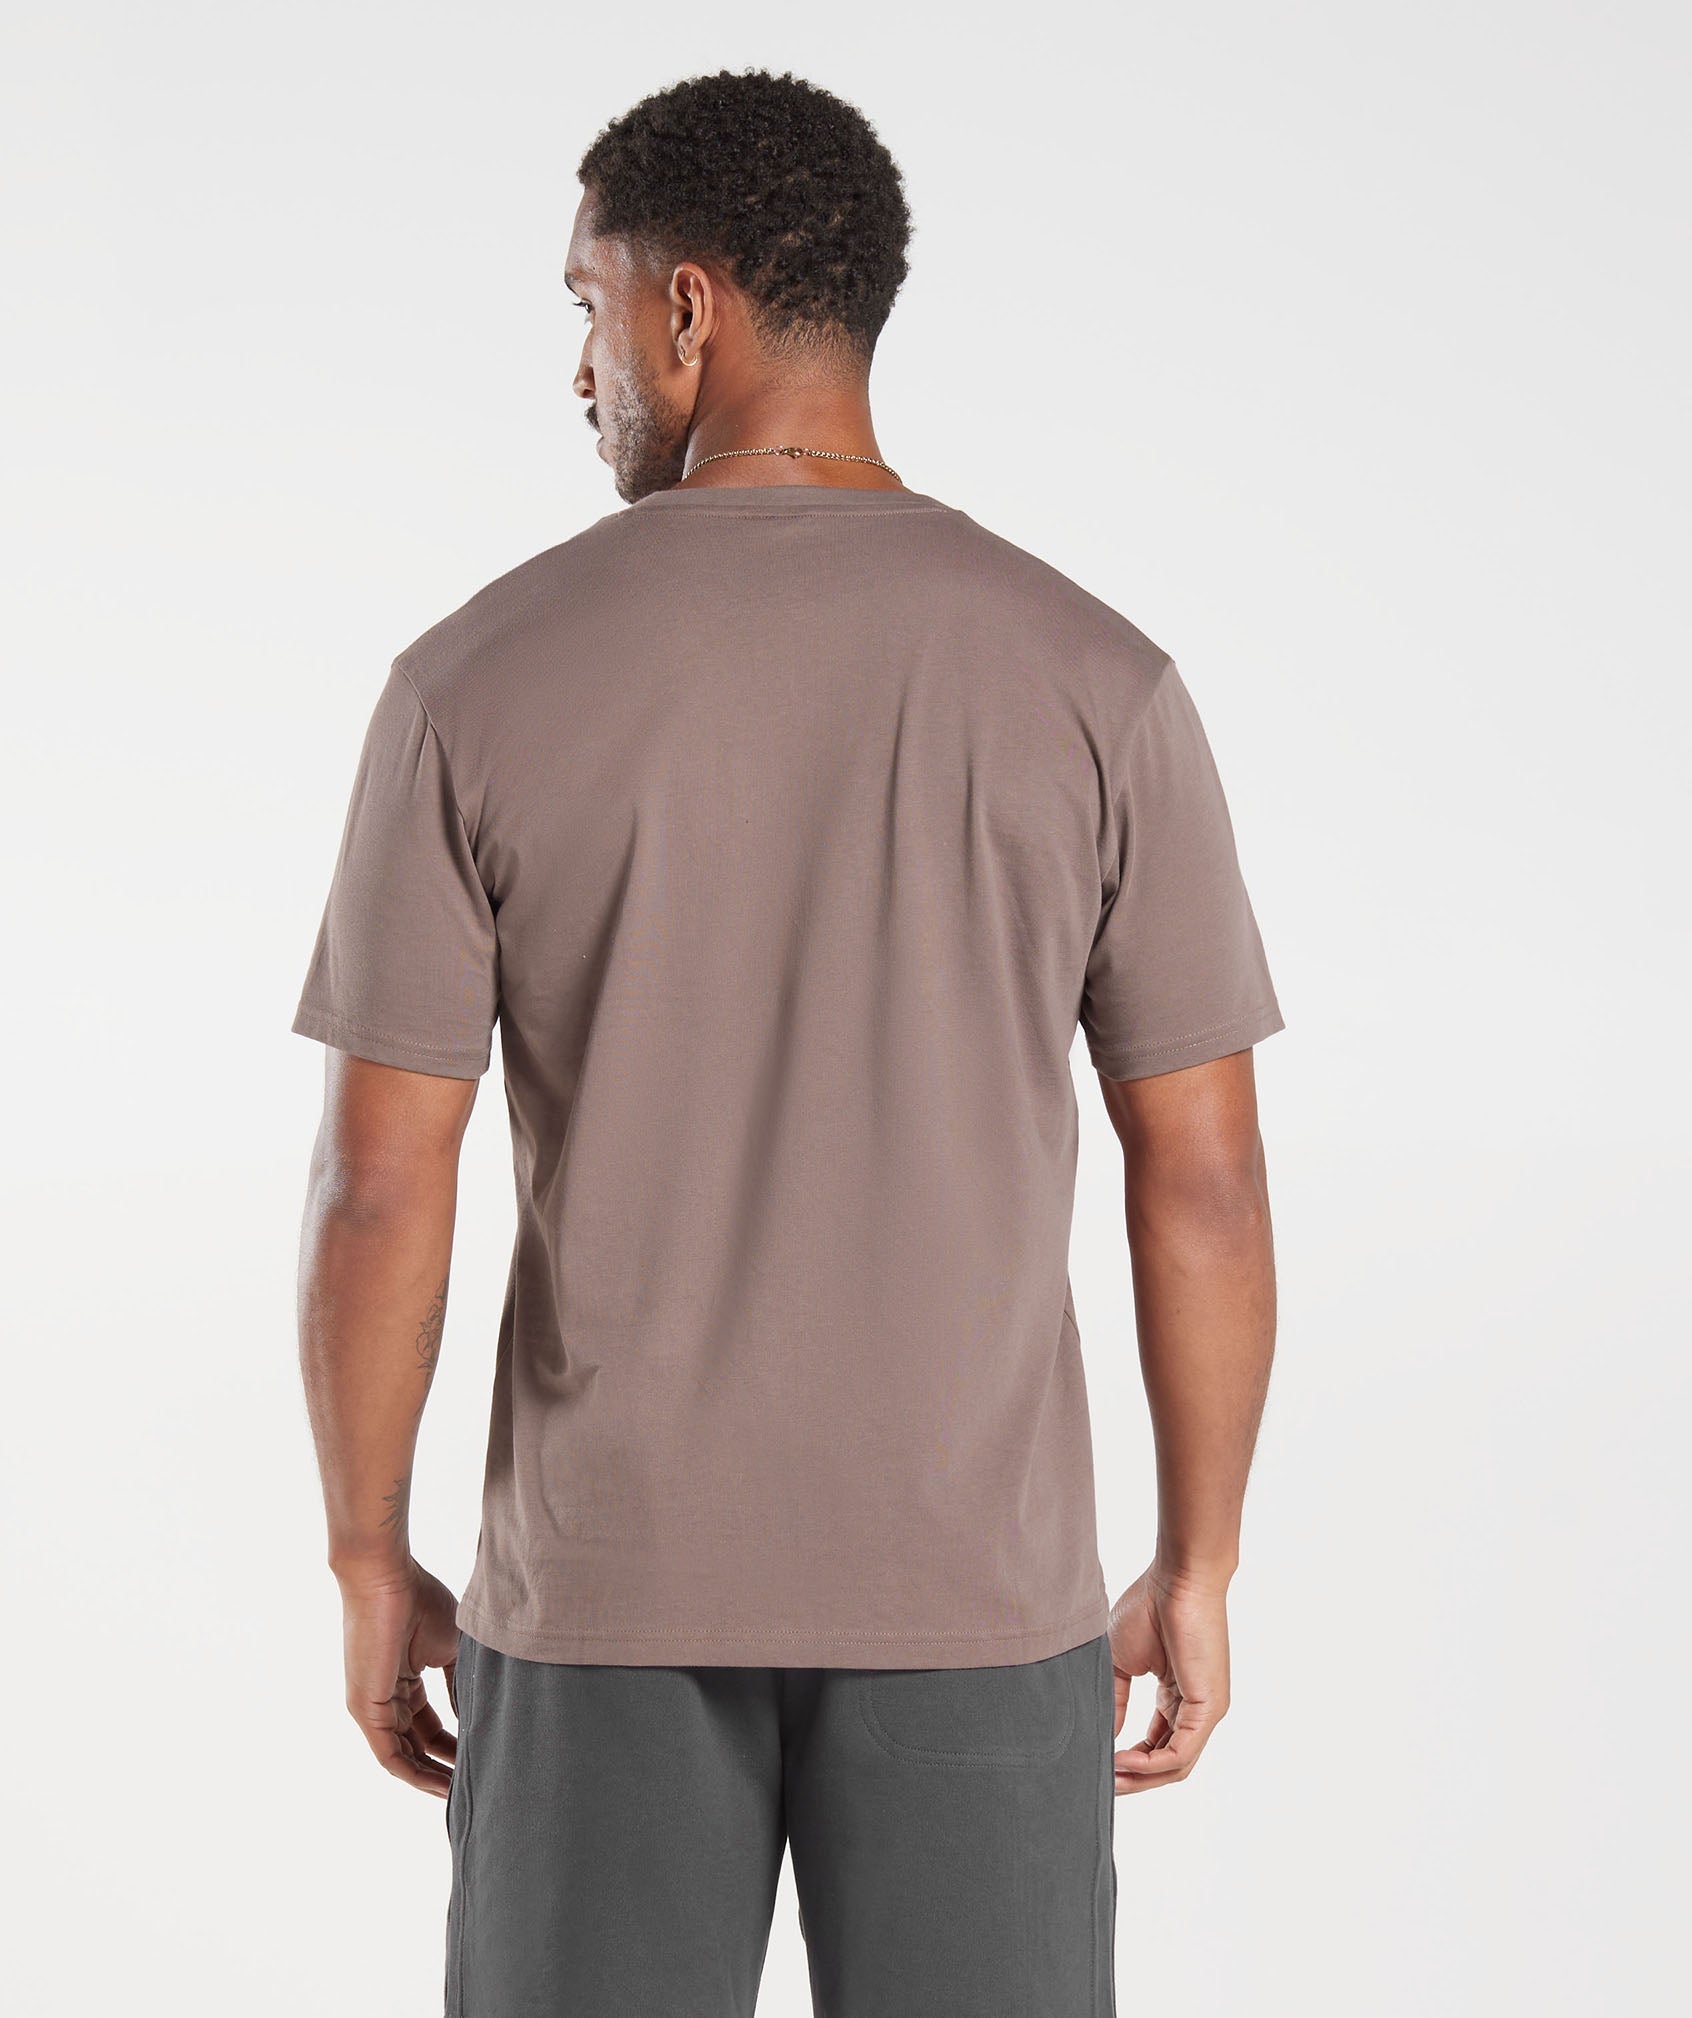 Crest T-Shirt in Truffle Brown - view 2